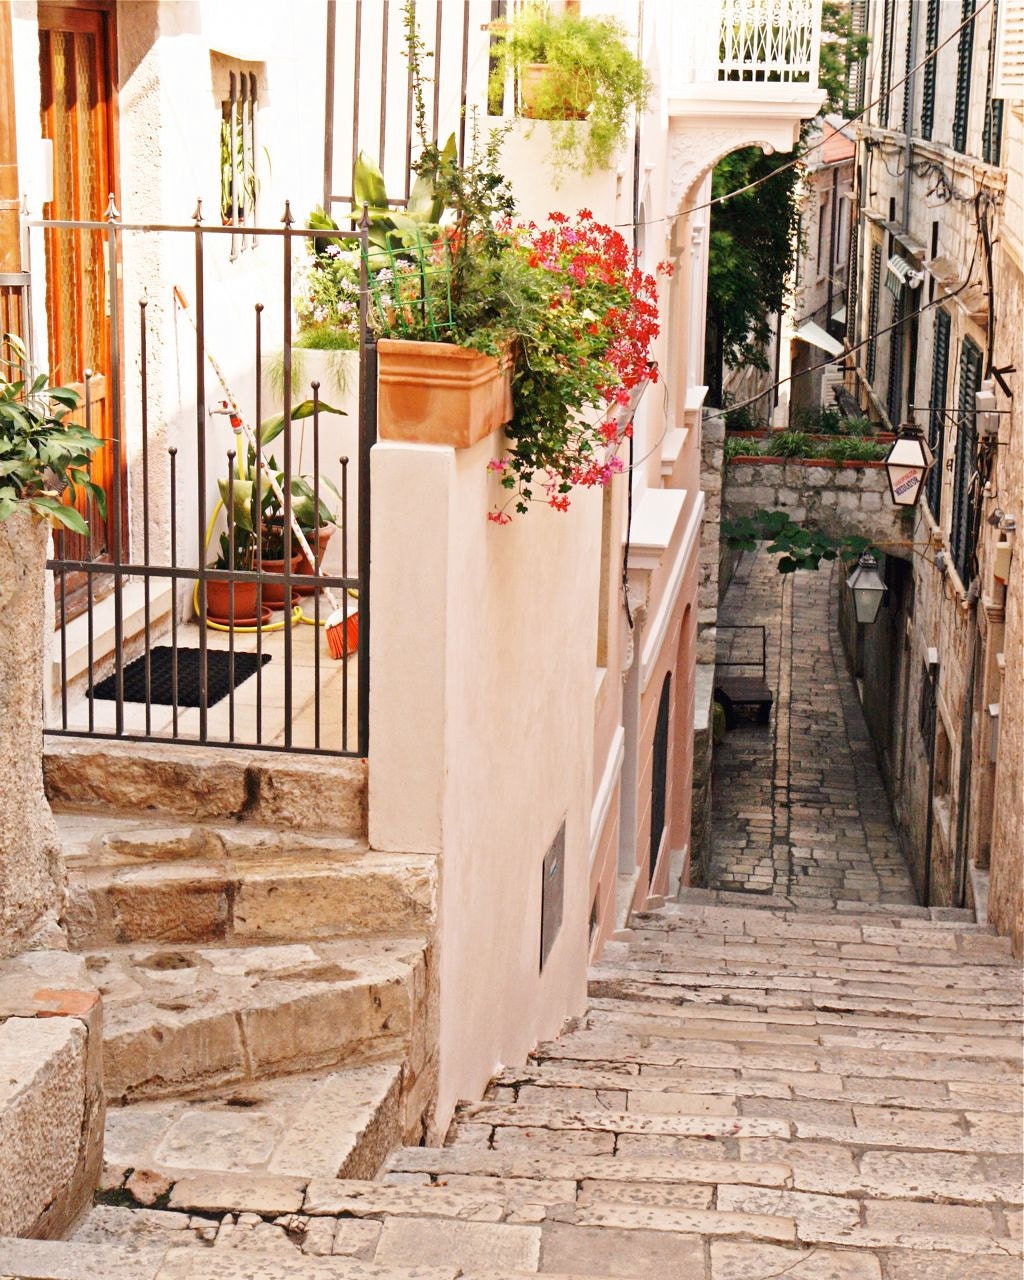 Pink Streets of Dubrovnik - Photography - Stepped Streets - Old City Photo - Flowers - Mediterranean Decor - Travel Art - Feminine Print